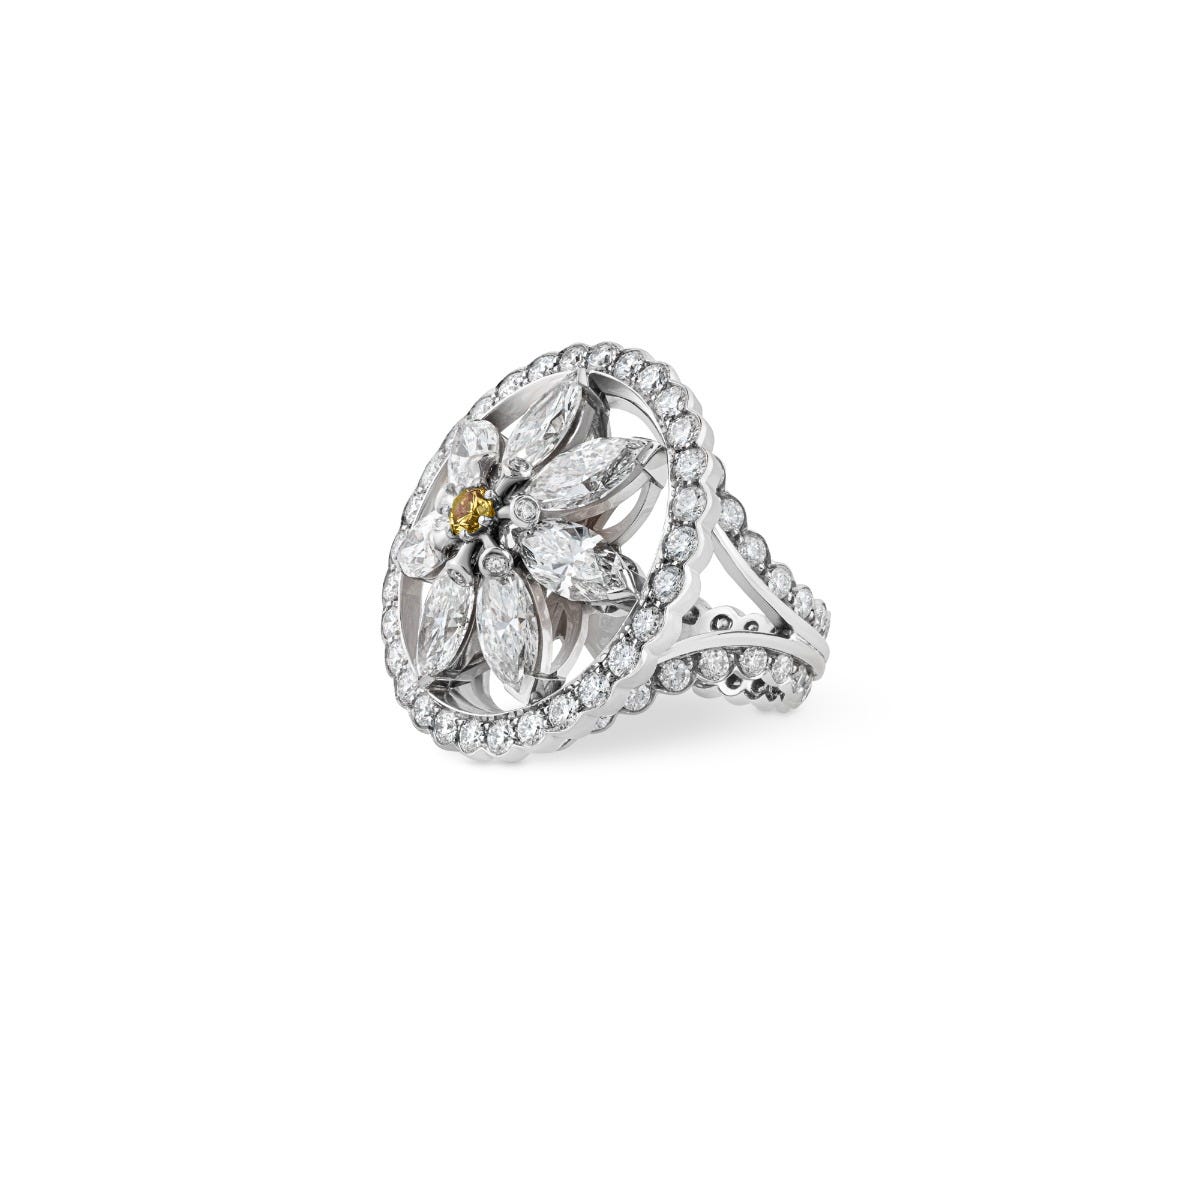 Daisy Ring in 18ct White Gold with Diamonds